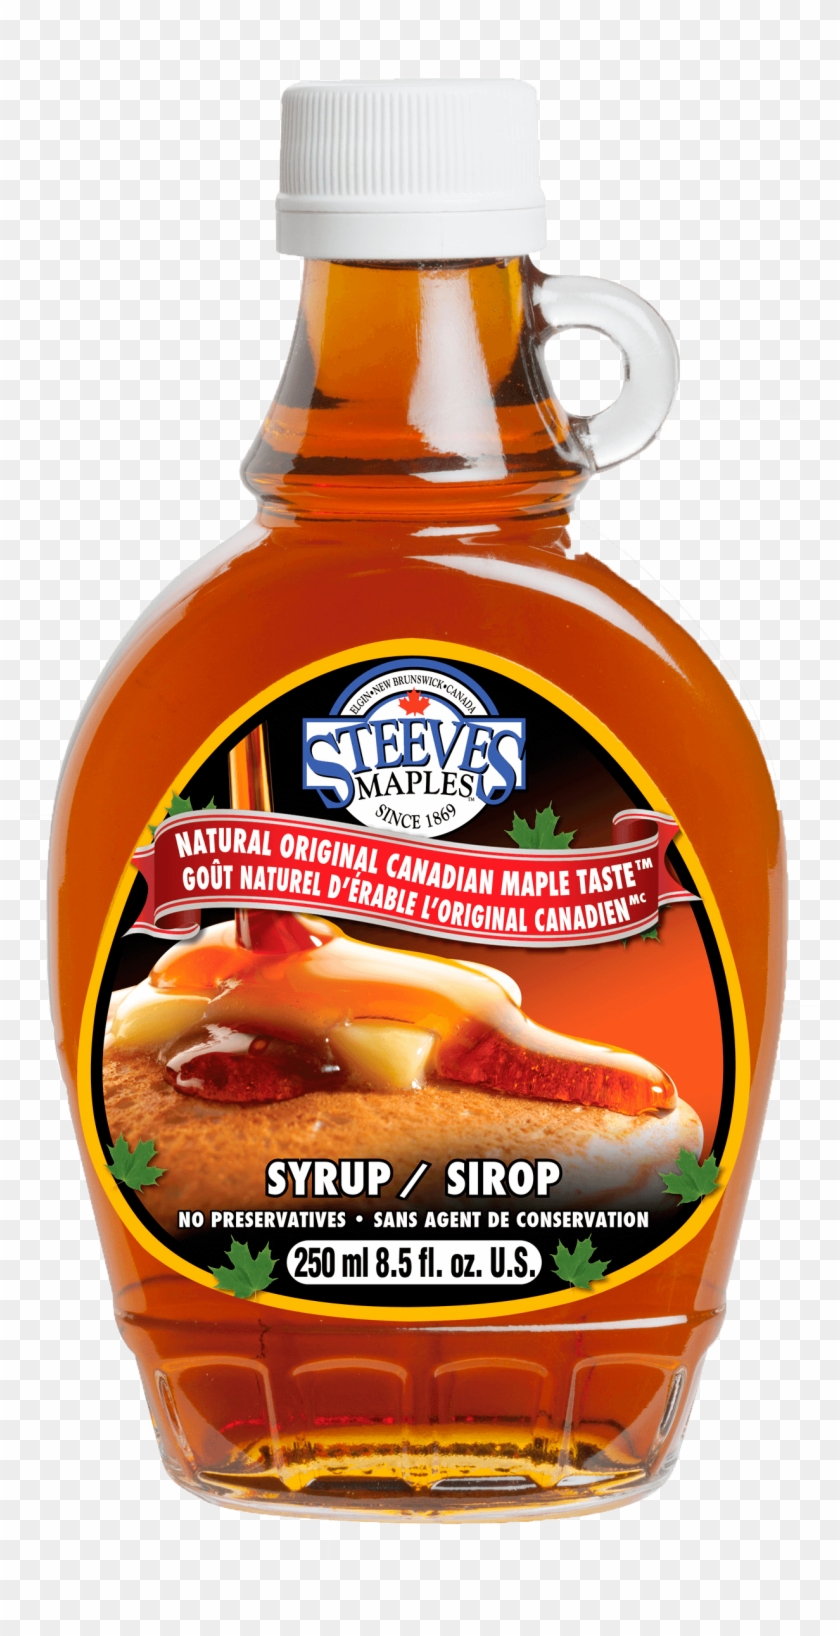 Of Maple Flavoured Products - Maple Syrup Companies In Canada Clipart #1342784